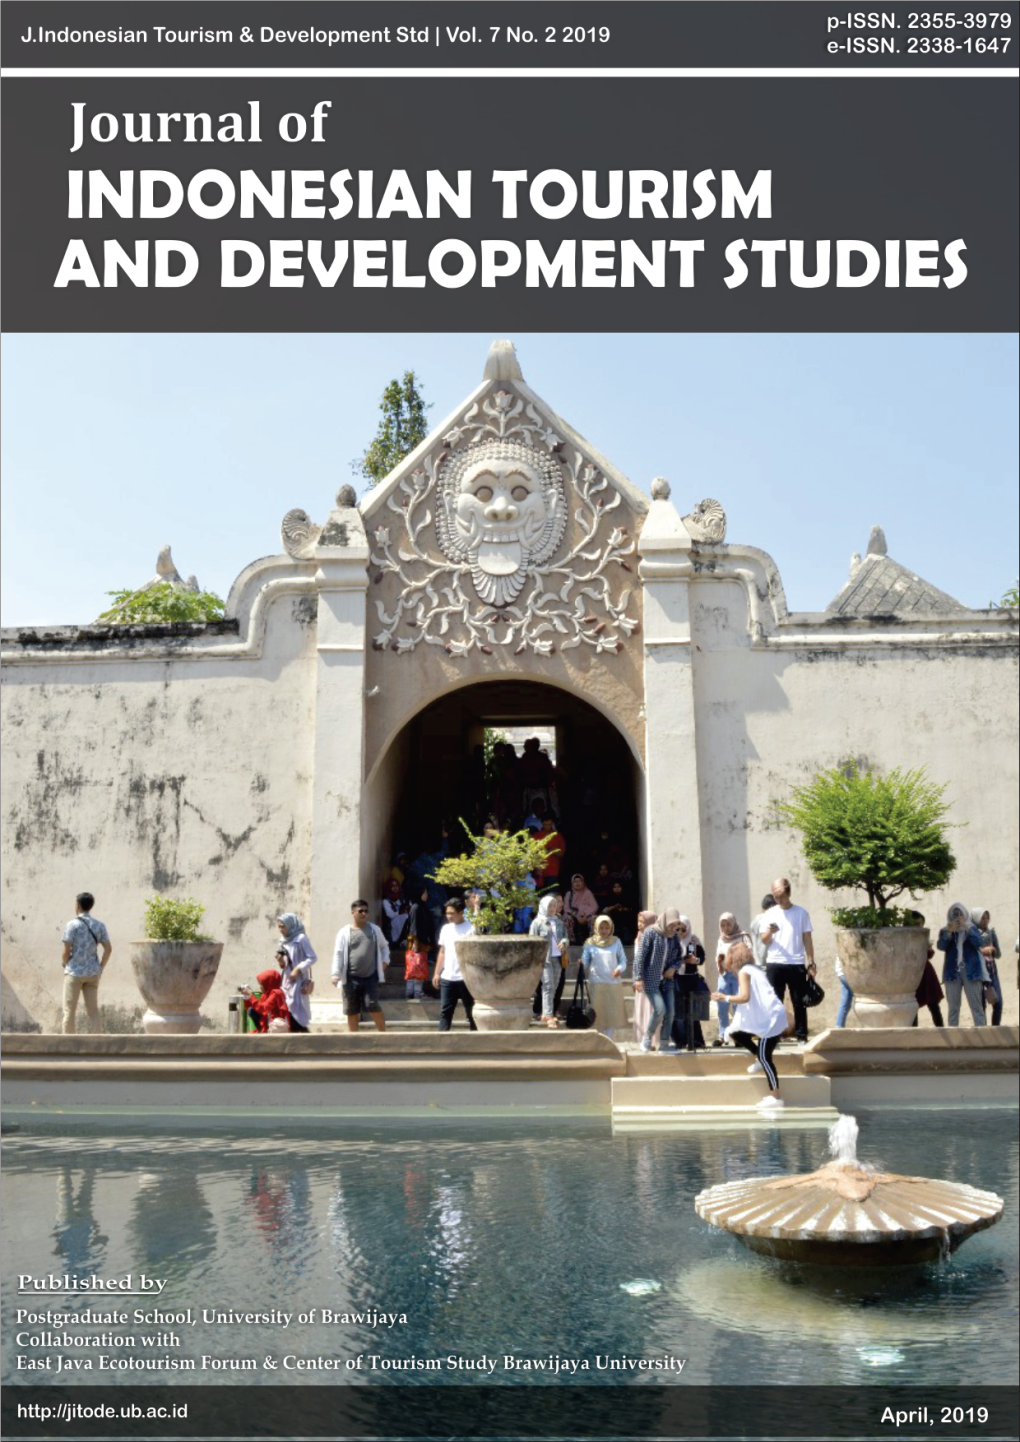 Journal of Indonesian Tourism and Development Studies